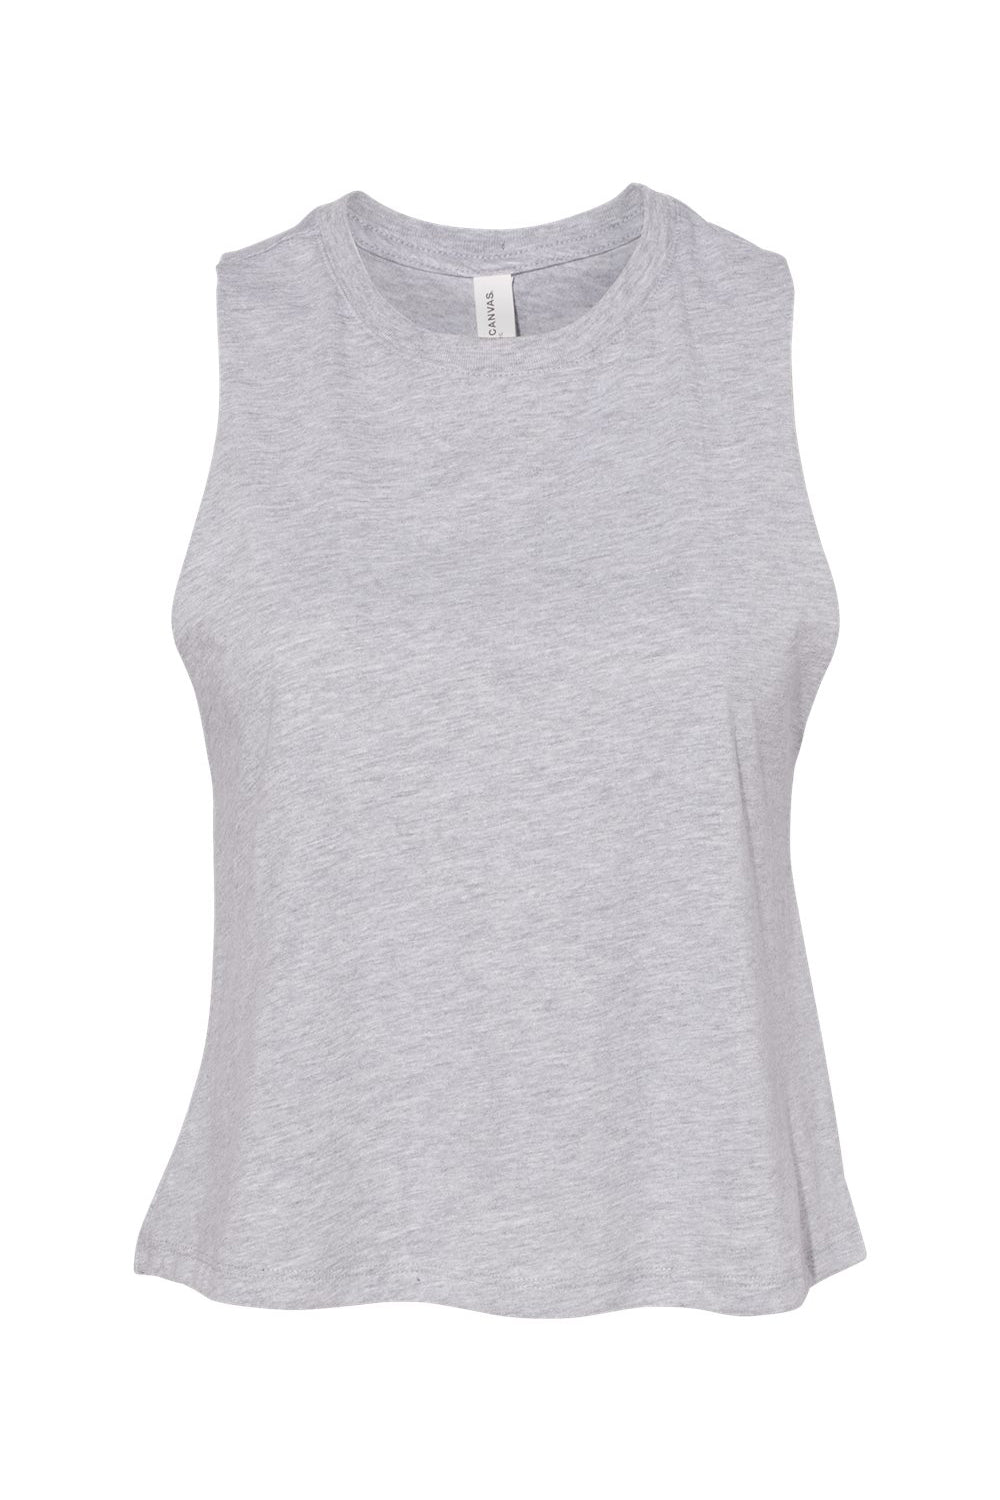 Bella + Canvas BC6682/6682 Womens Cropped Tank Top Heather Grey Flat Front